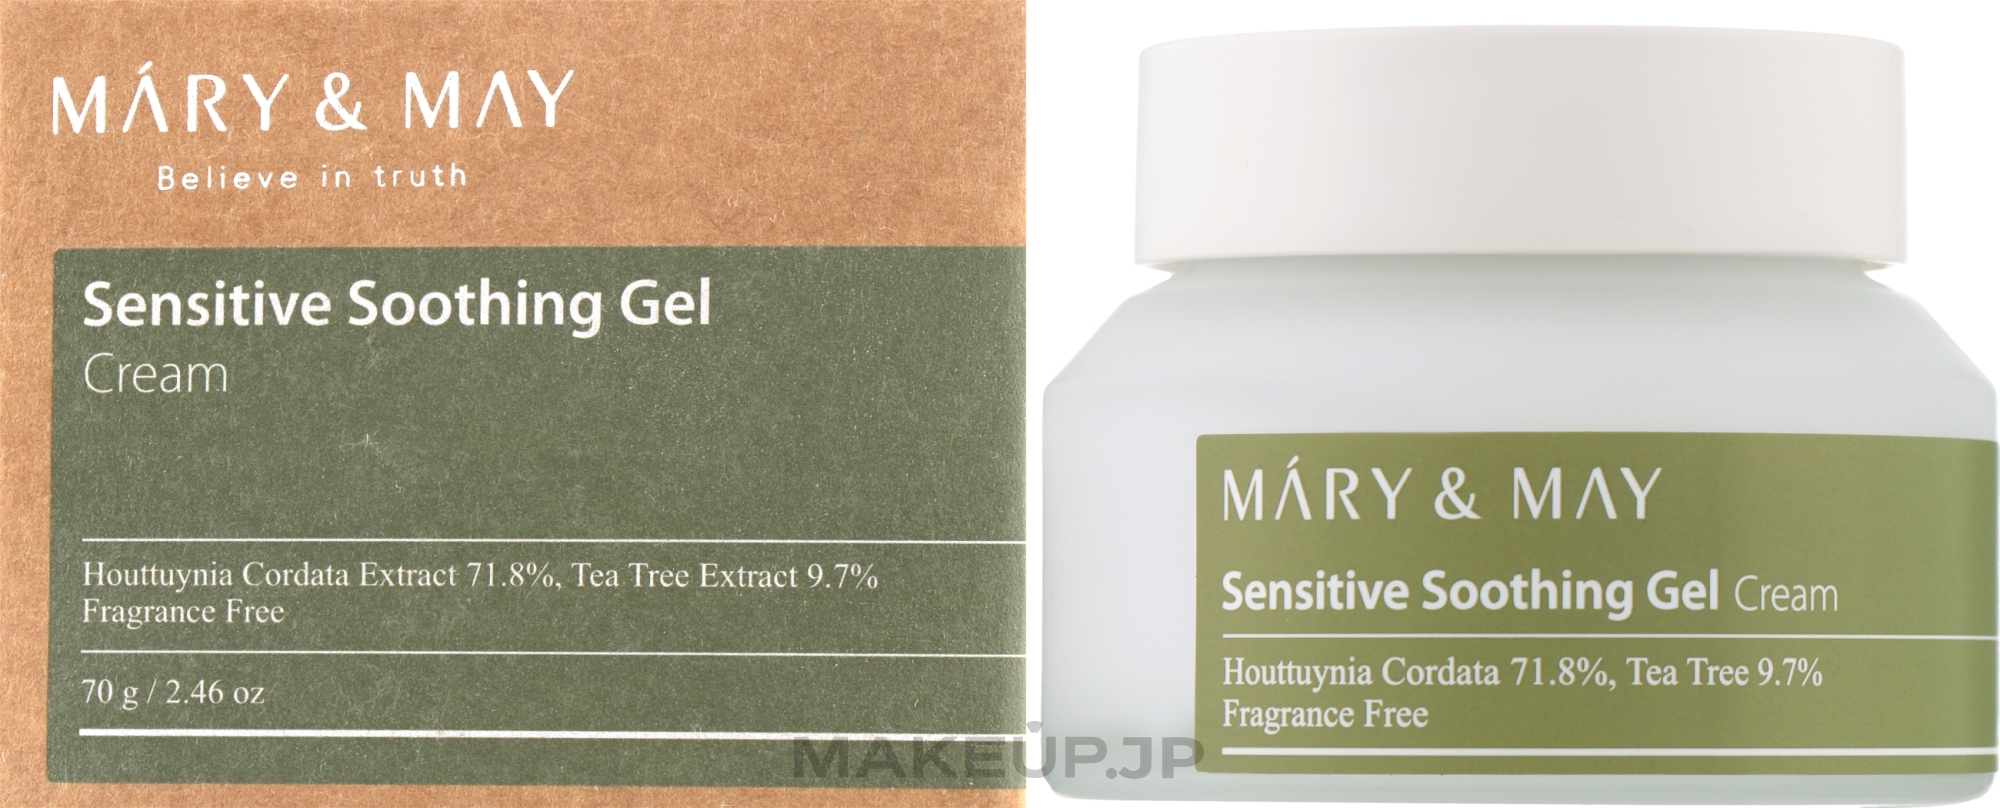 Soothing Facial Cream Gel for Problem Skin - Mary & May Sensitive Soothing Gel — photo 70 g